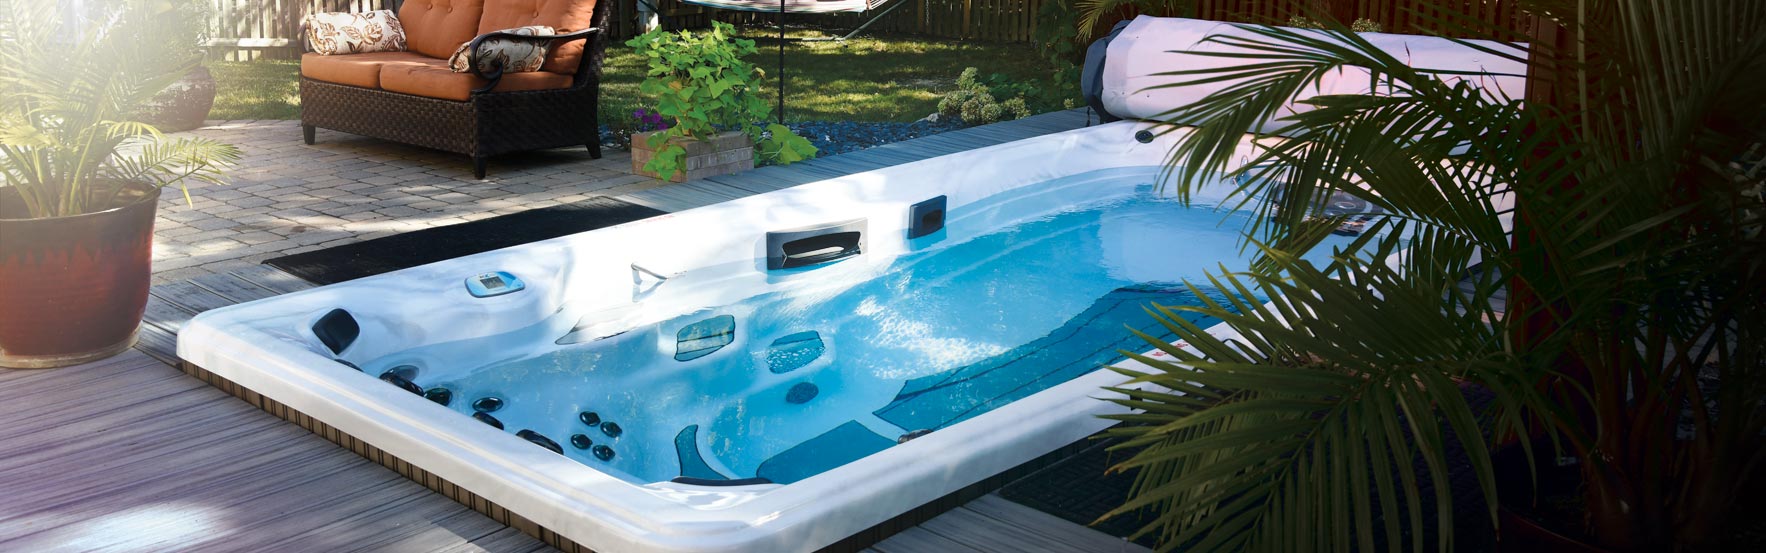 Frequently asked questions about swim spas